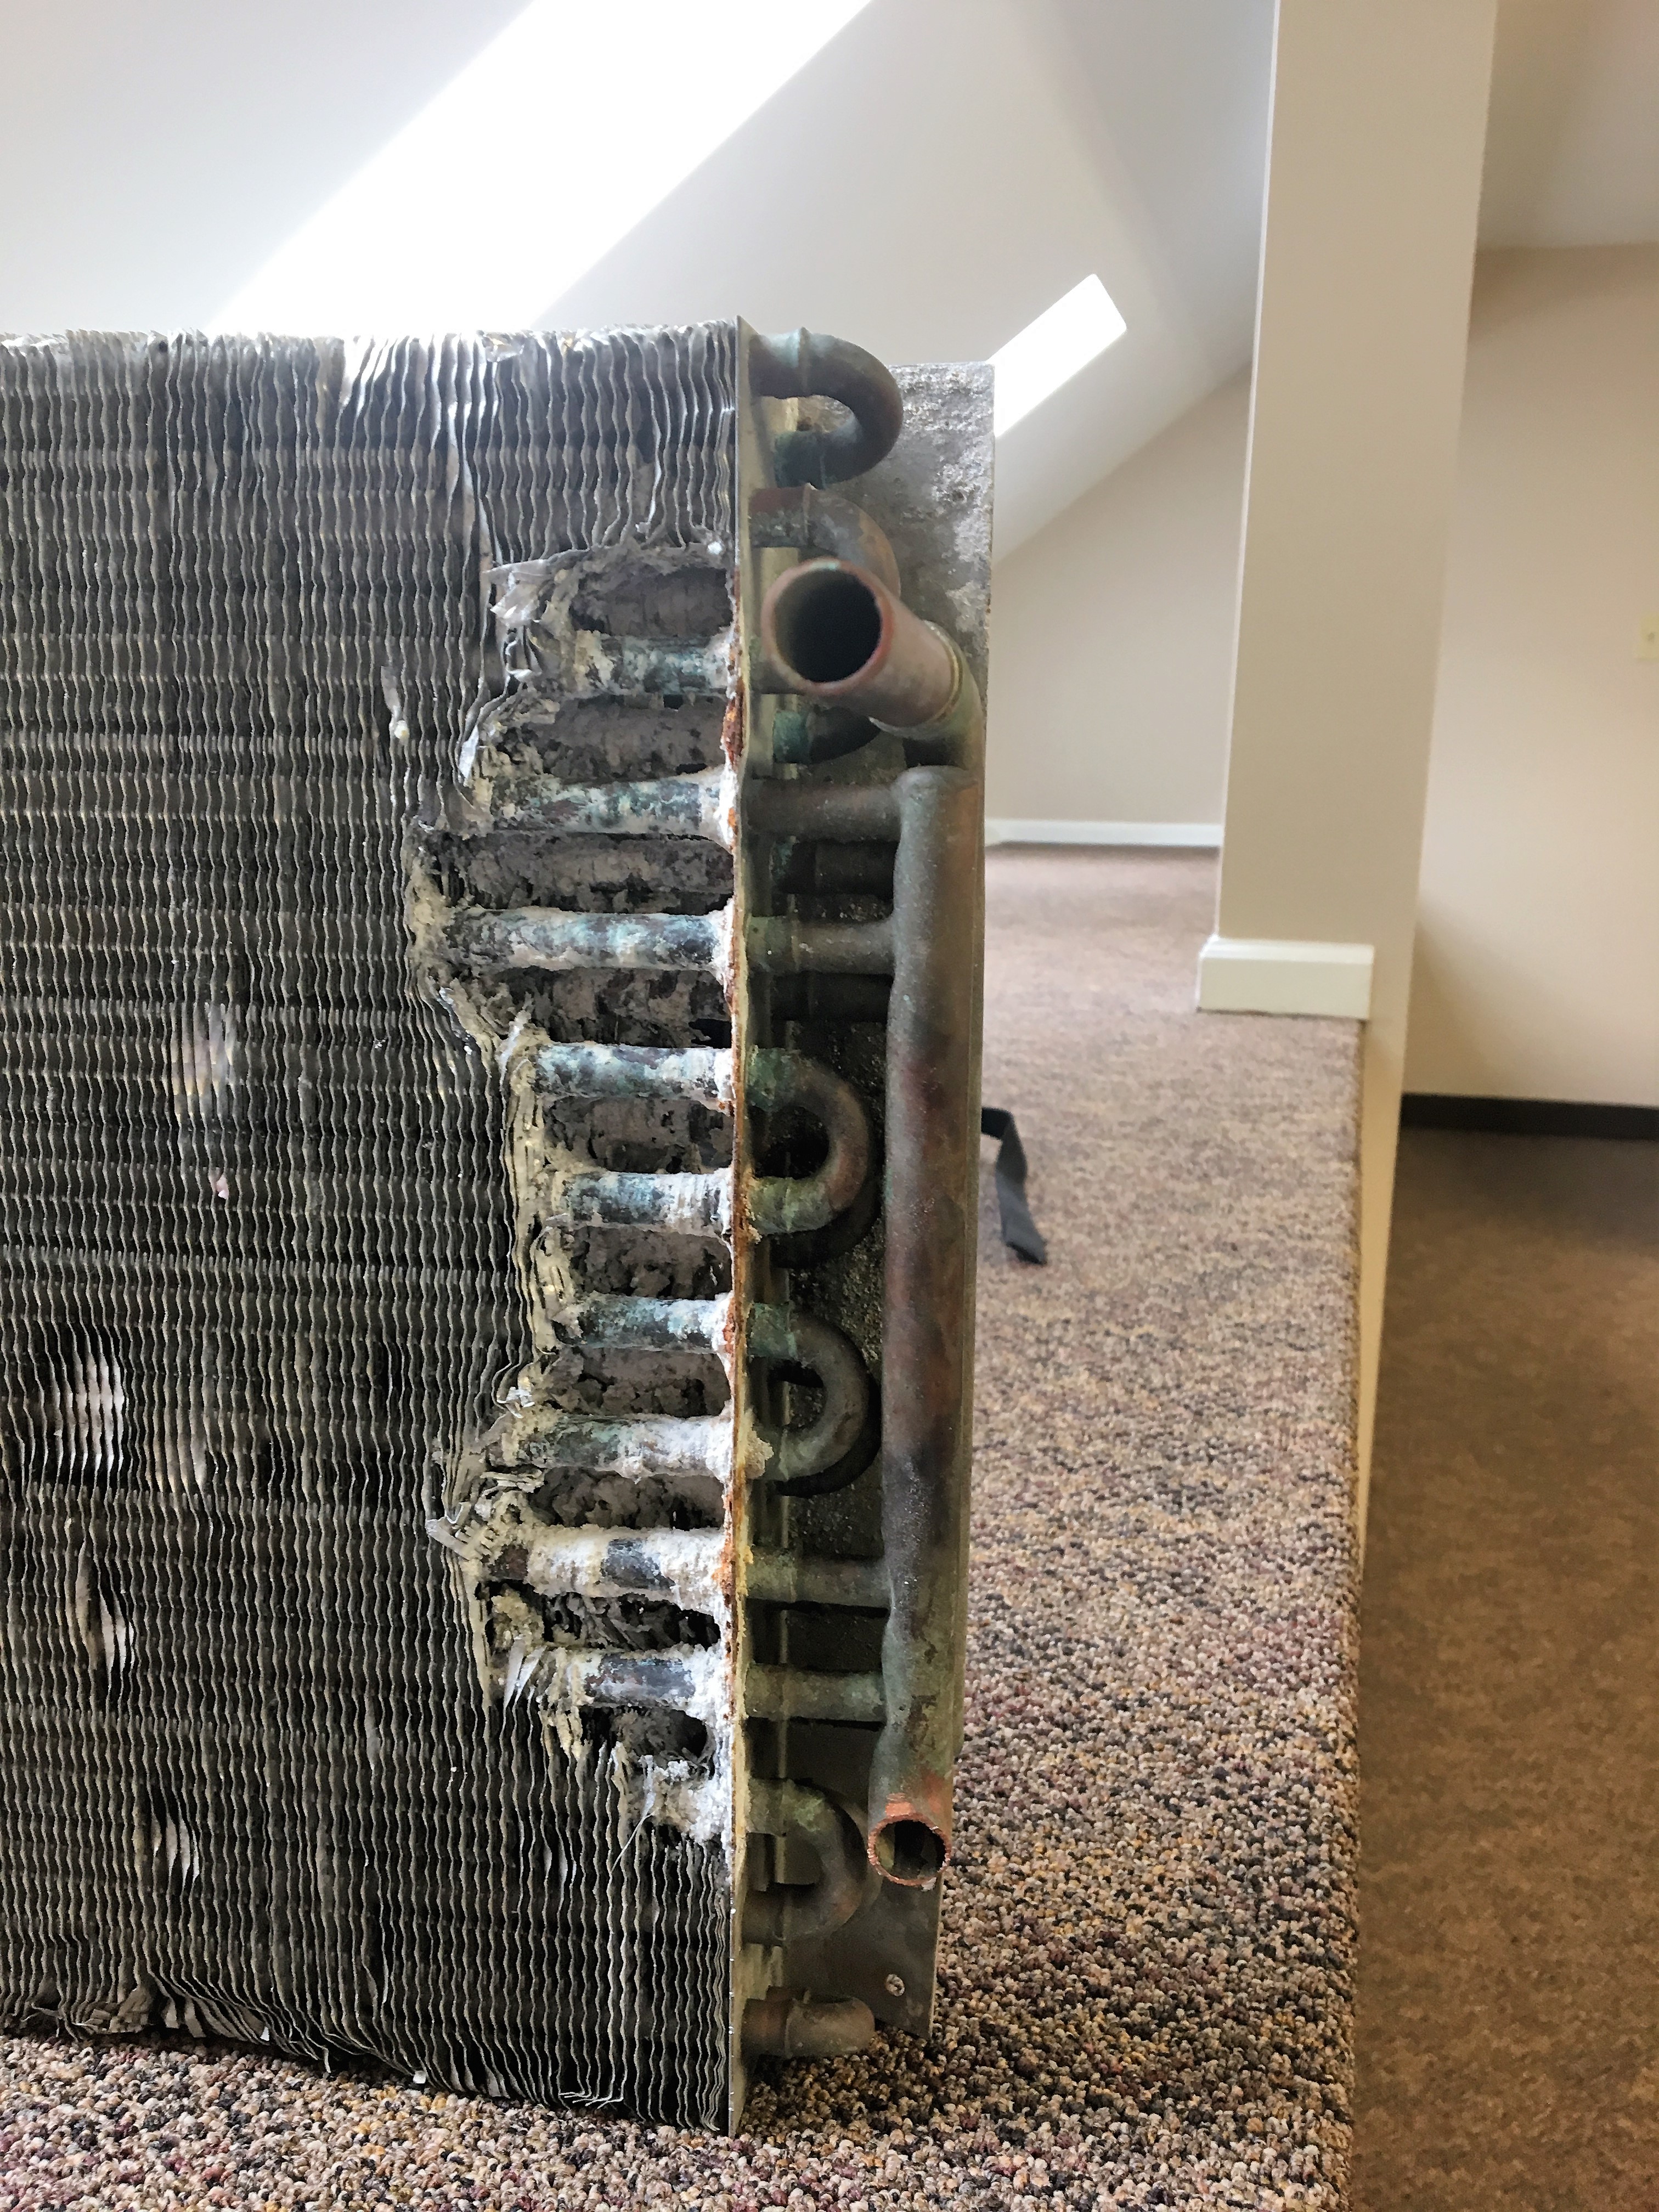 air conditioning - AC Coil Corrosion? - Home Improvement 